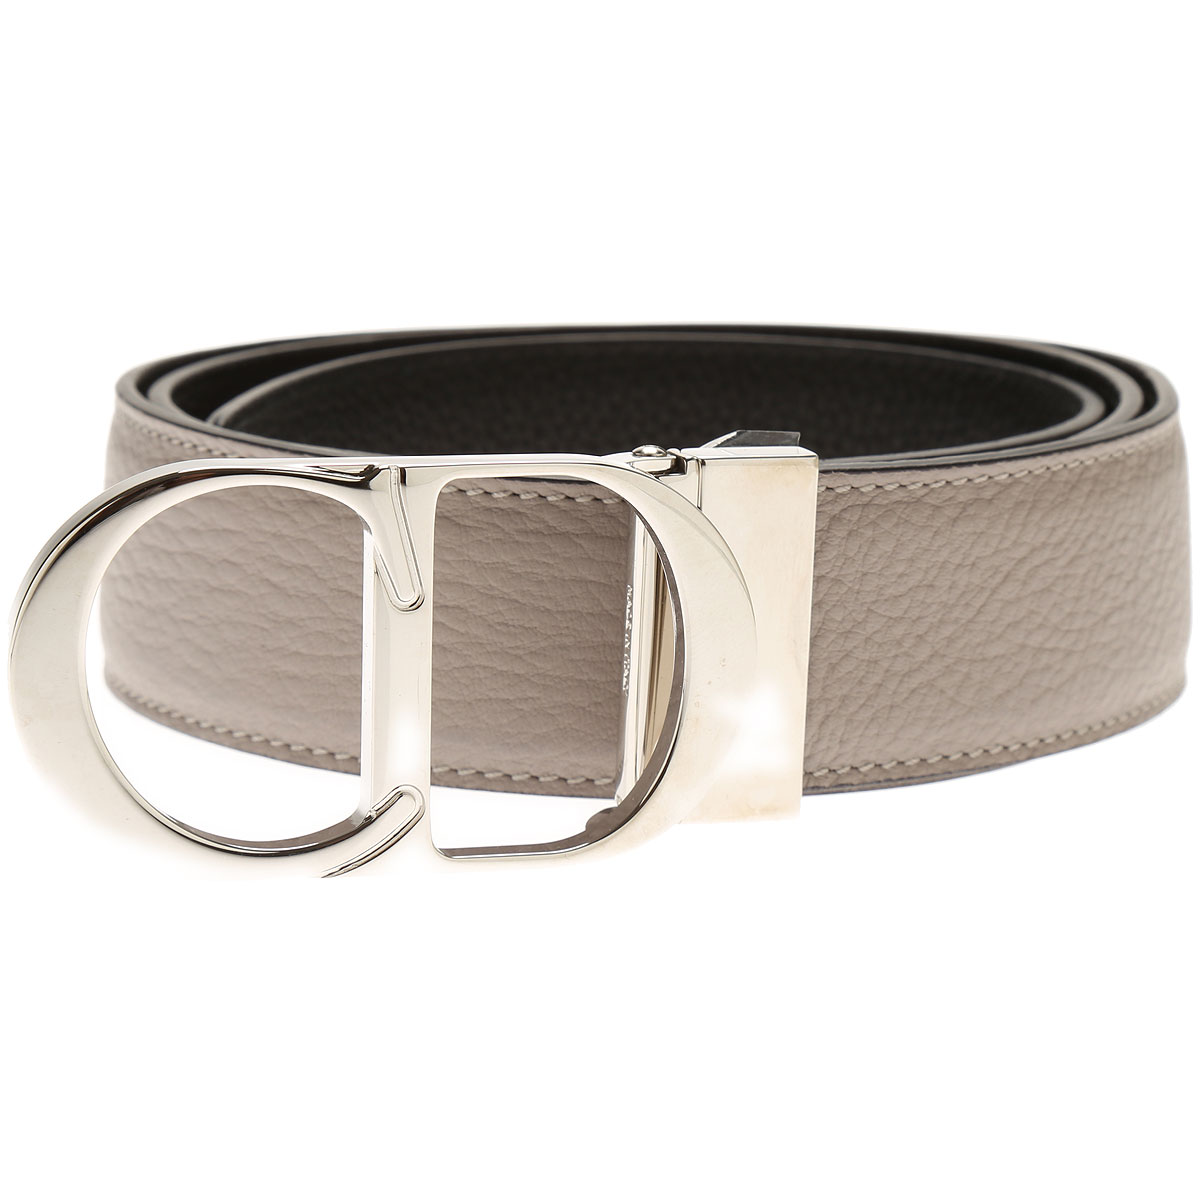 Mens Belts Christian Dior, Style code: 4044pltab-169-